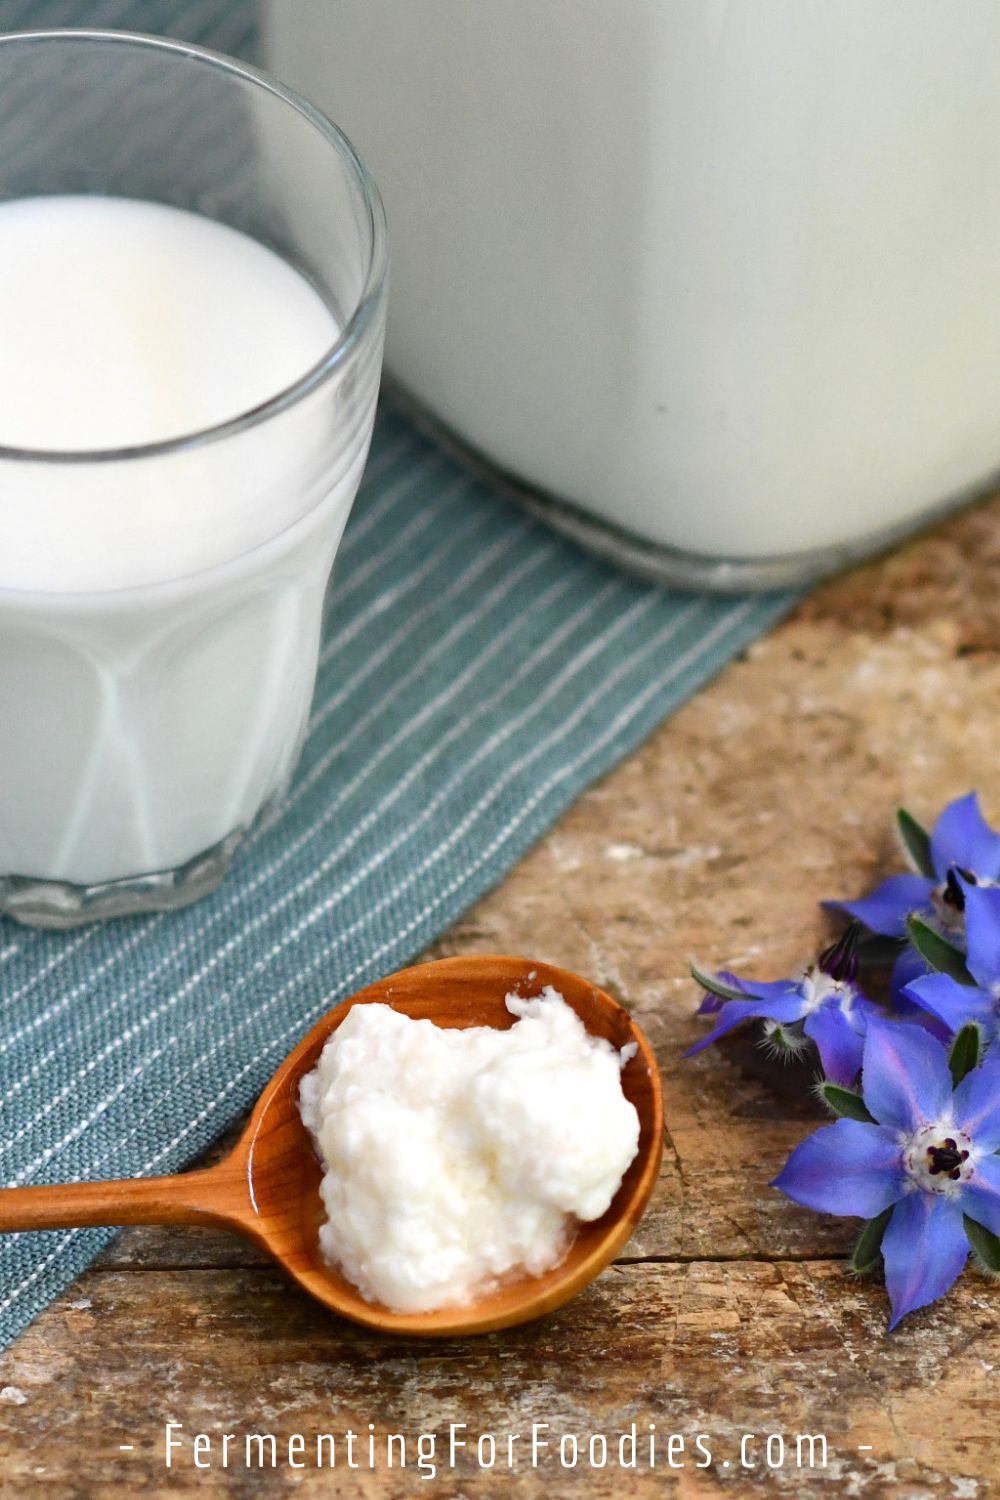 How to Make Kefir at Home - Check Out Our Easy and Informative Guide!